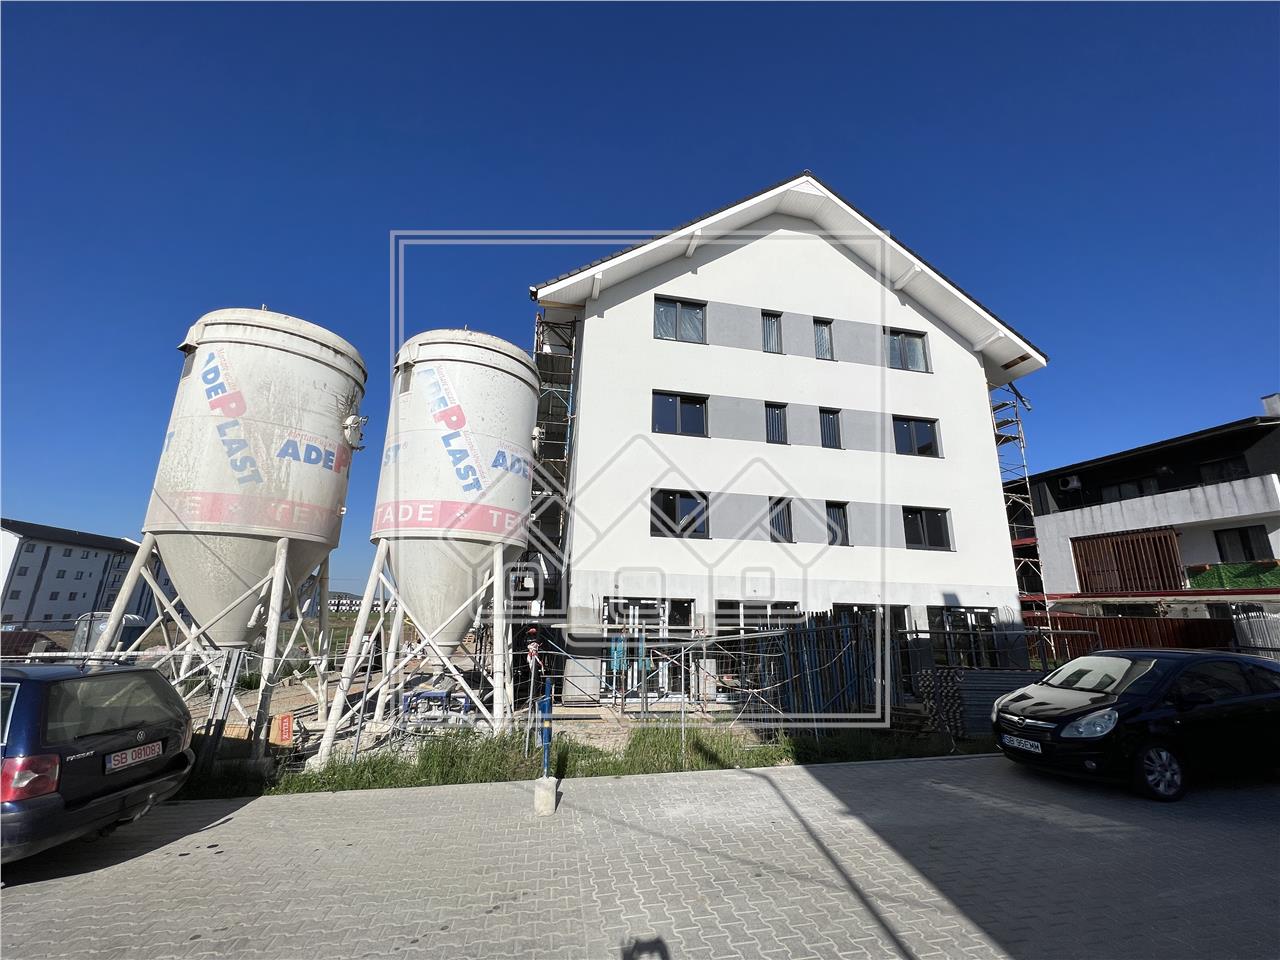 Prime Residence - Immobilien Sibiu